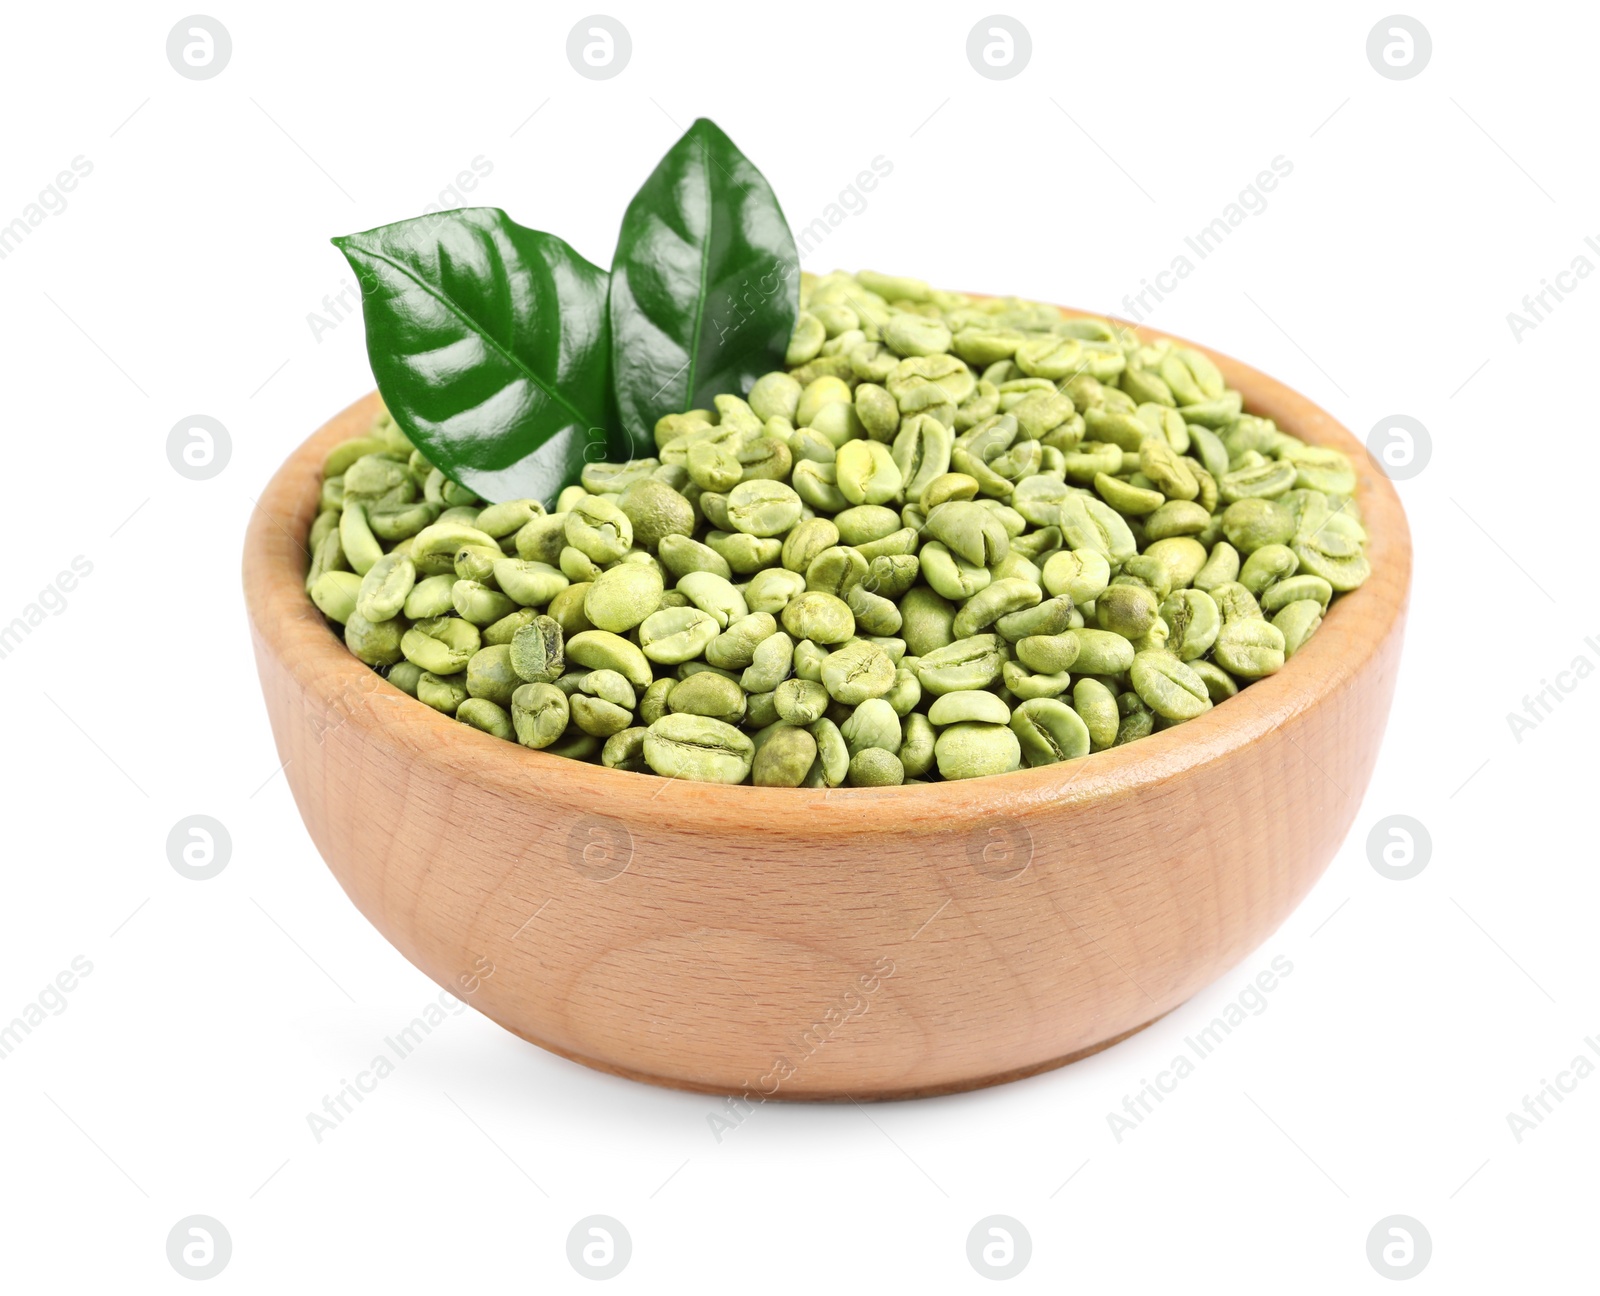 Photo of Green coffee beans with leaves in wooden bowl on white background